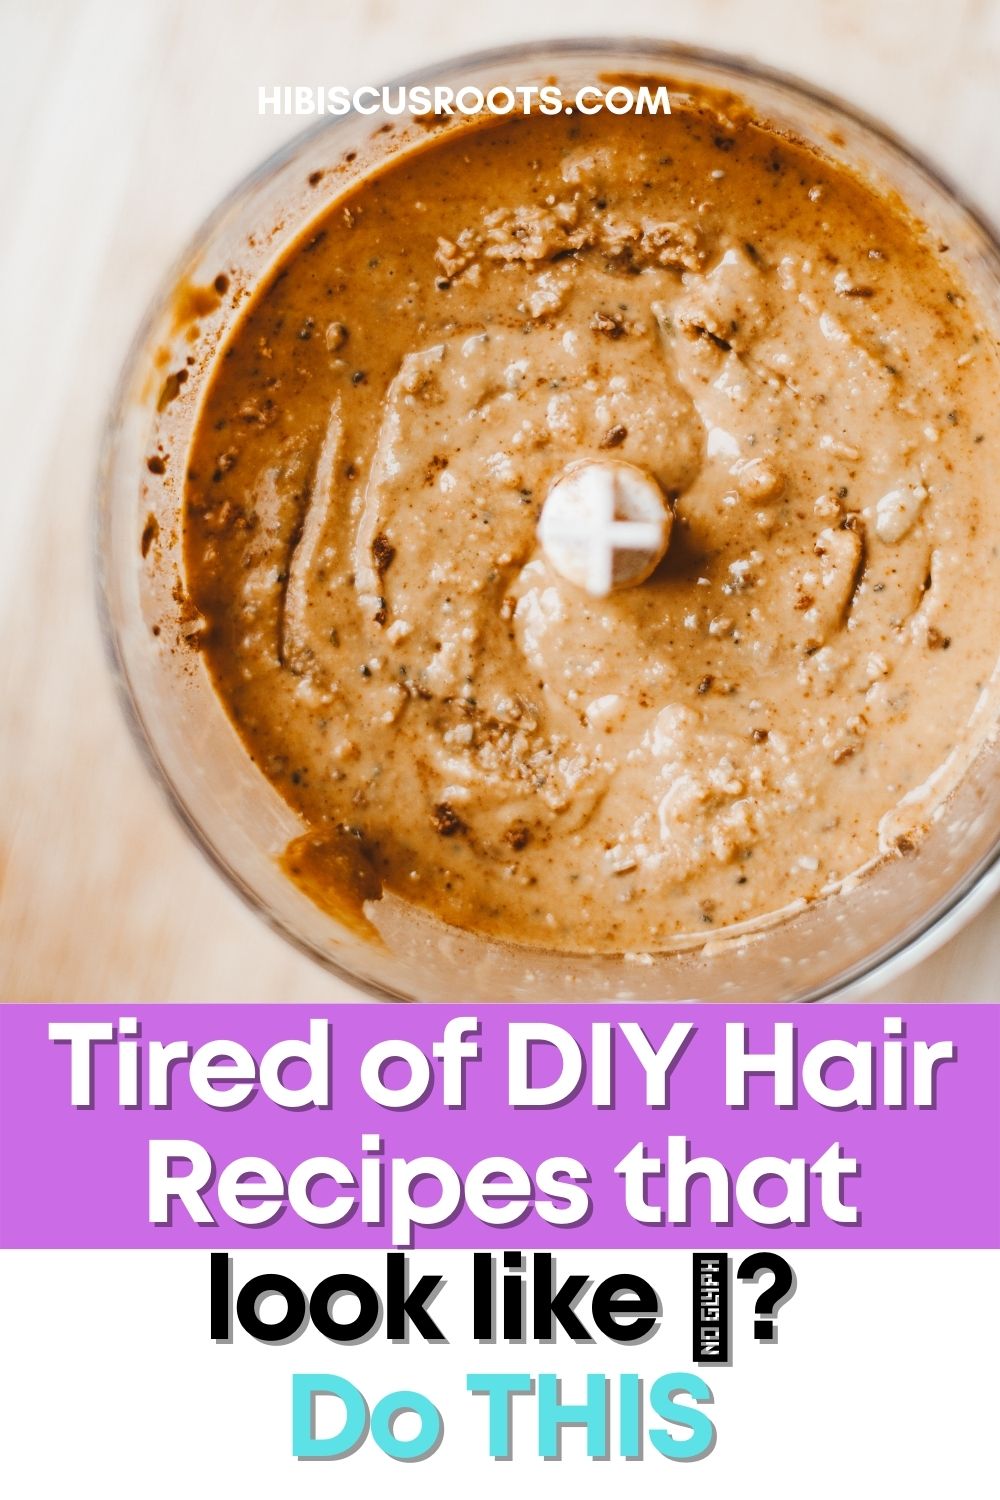 Your DIY Natural Hair Recipes NEED this Pop of Color!